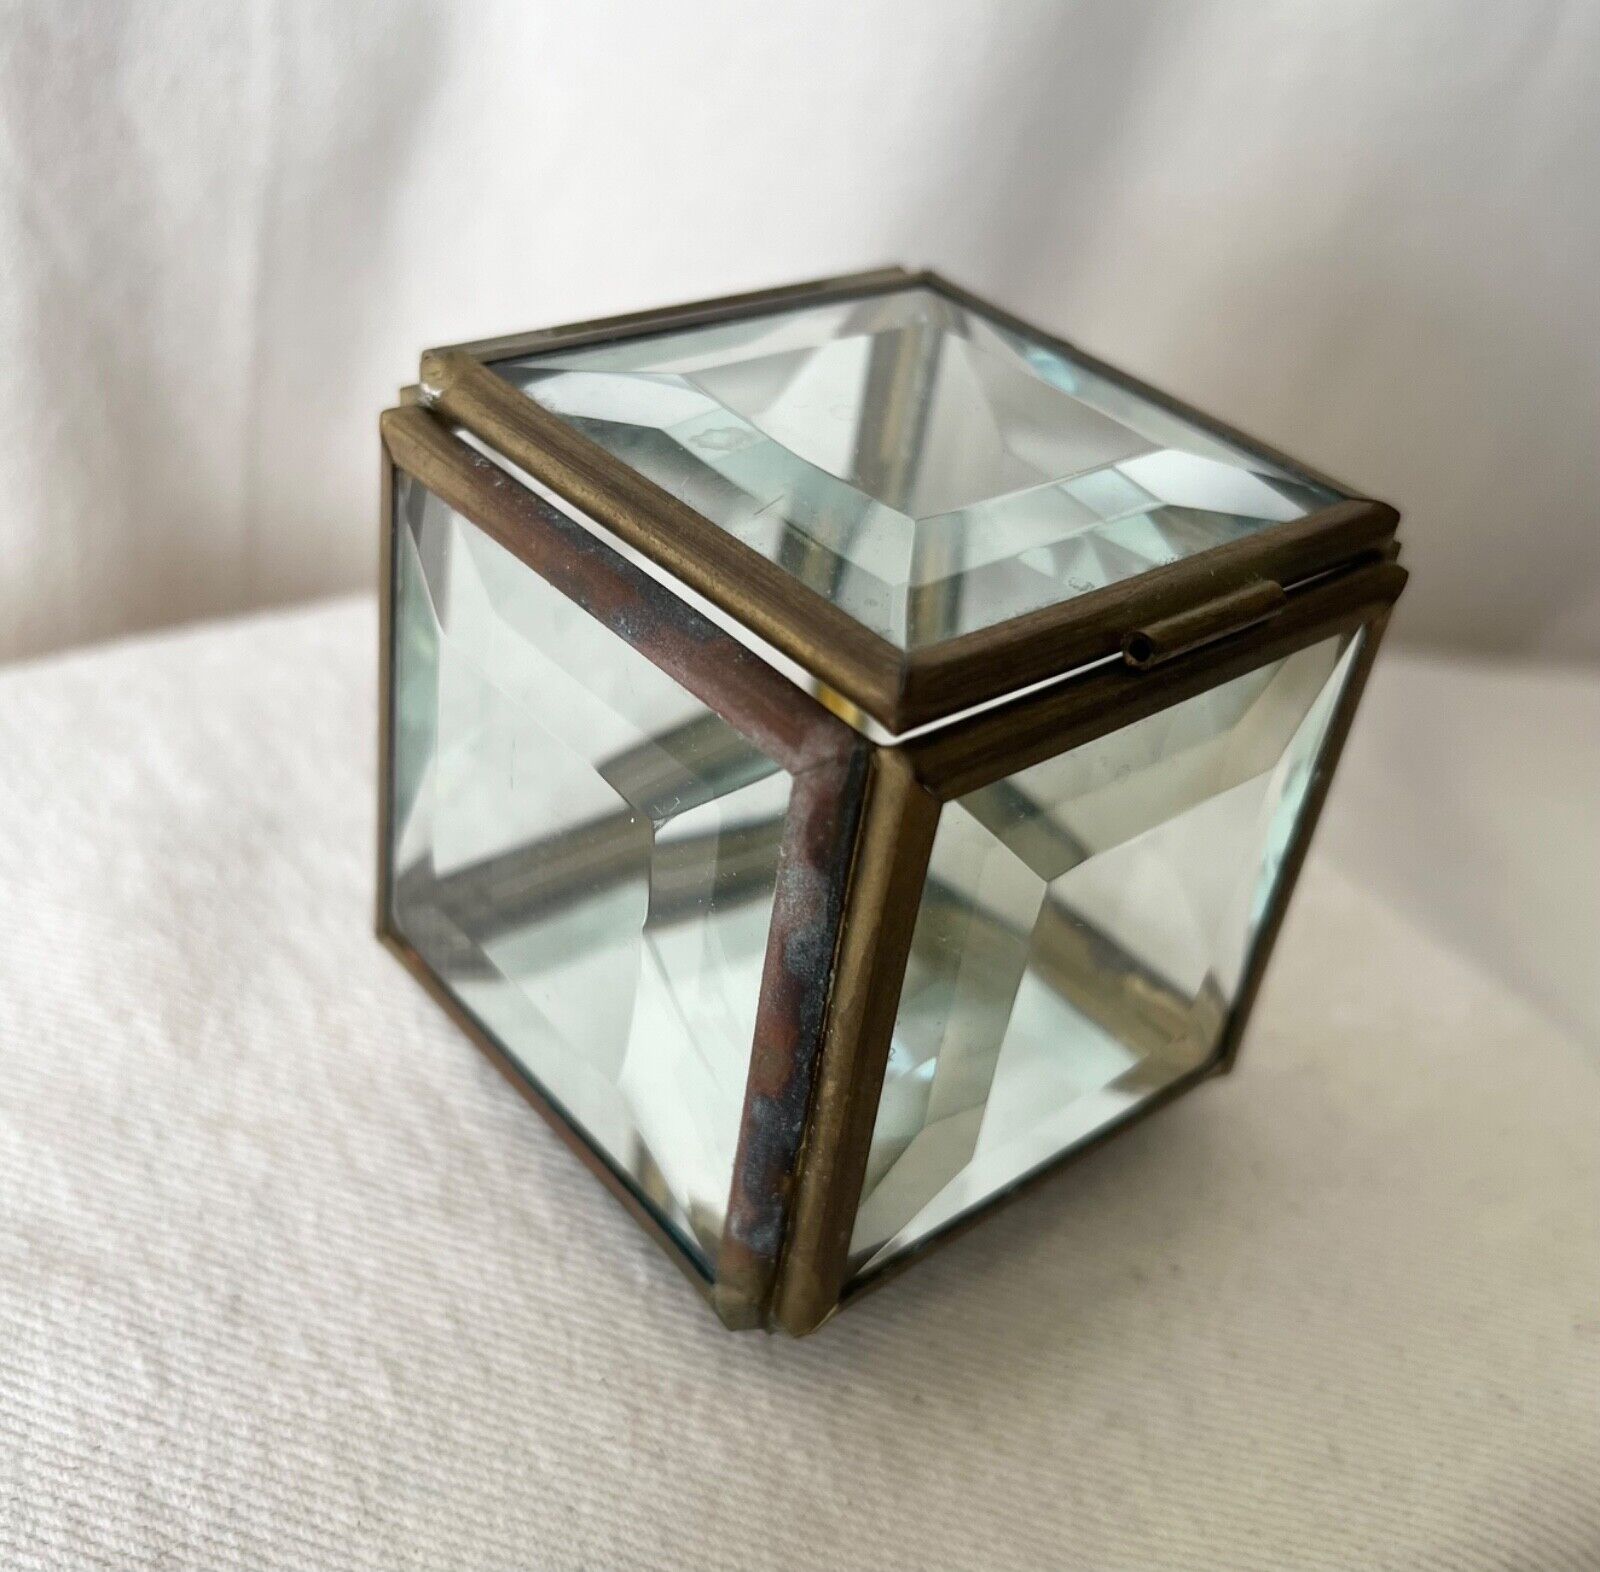 Vintage Art Deco Brass and Glass Cubed Jewelry Box